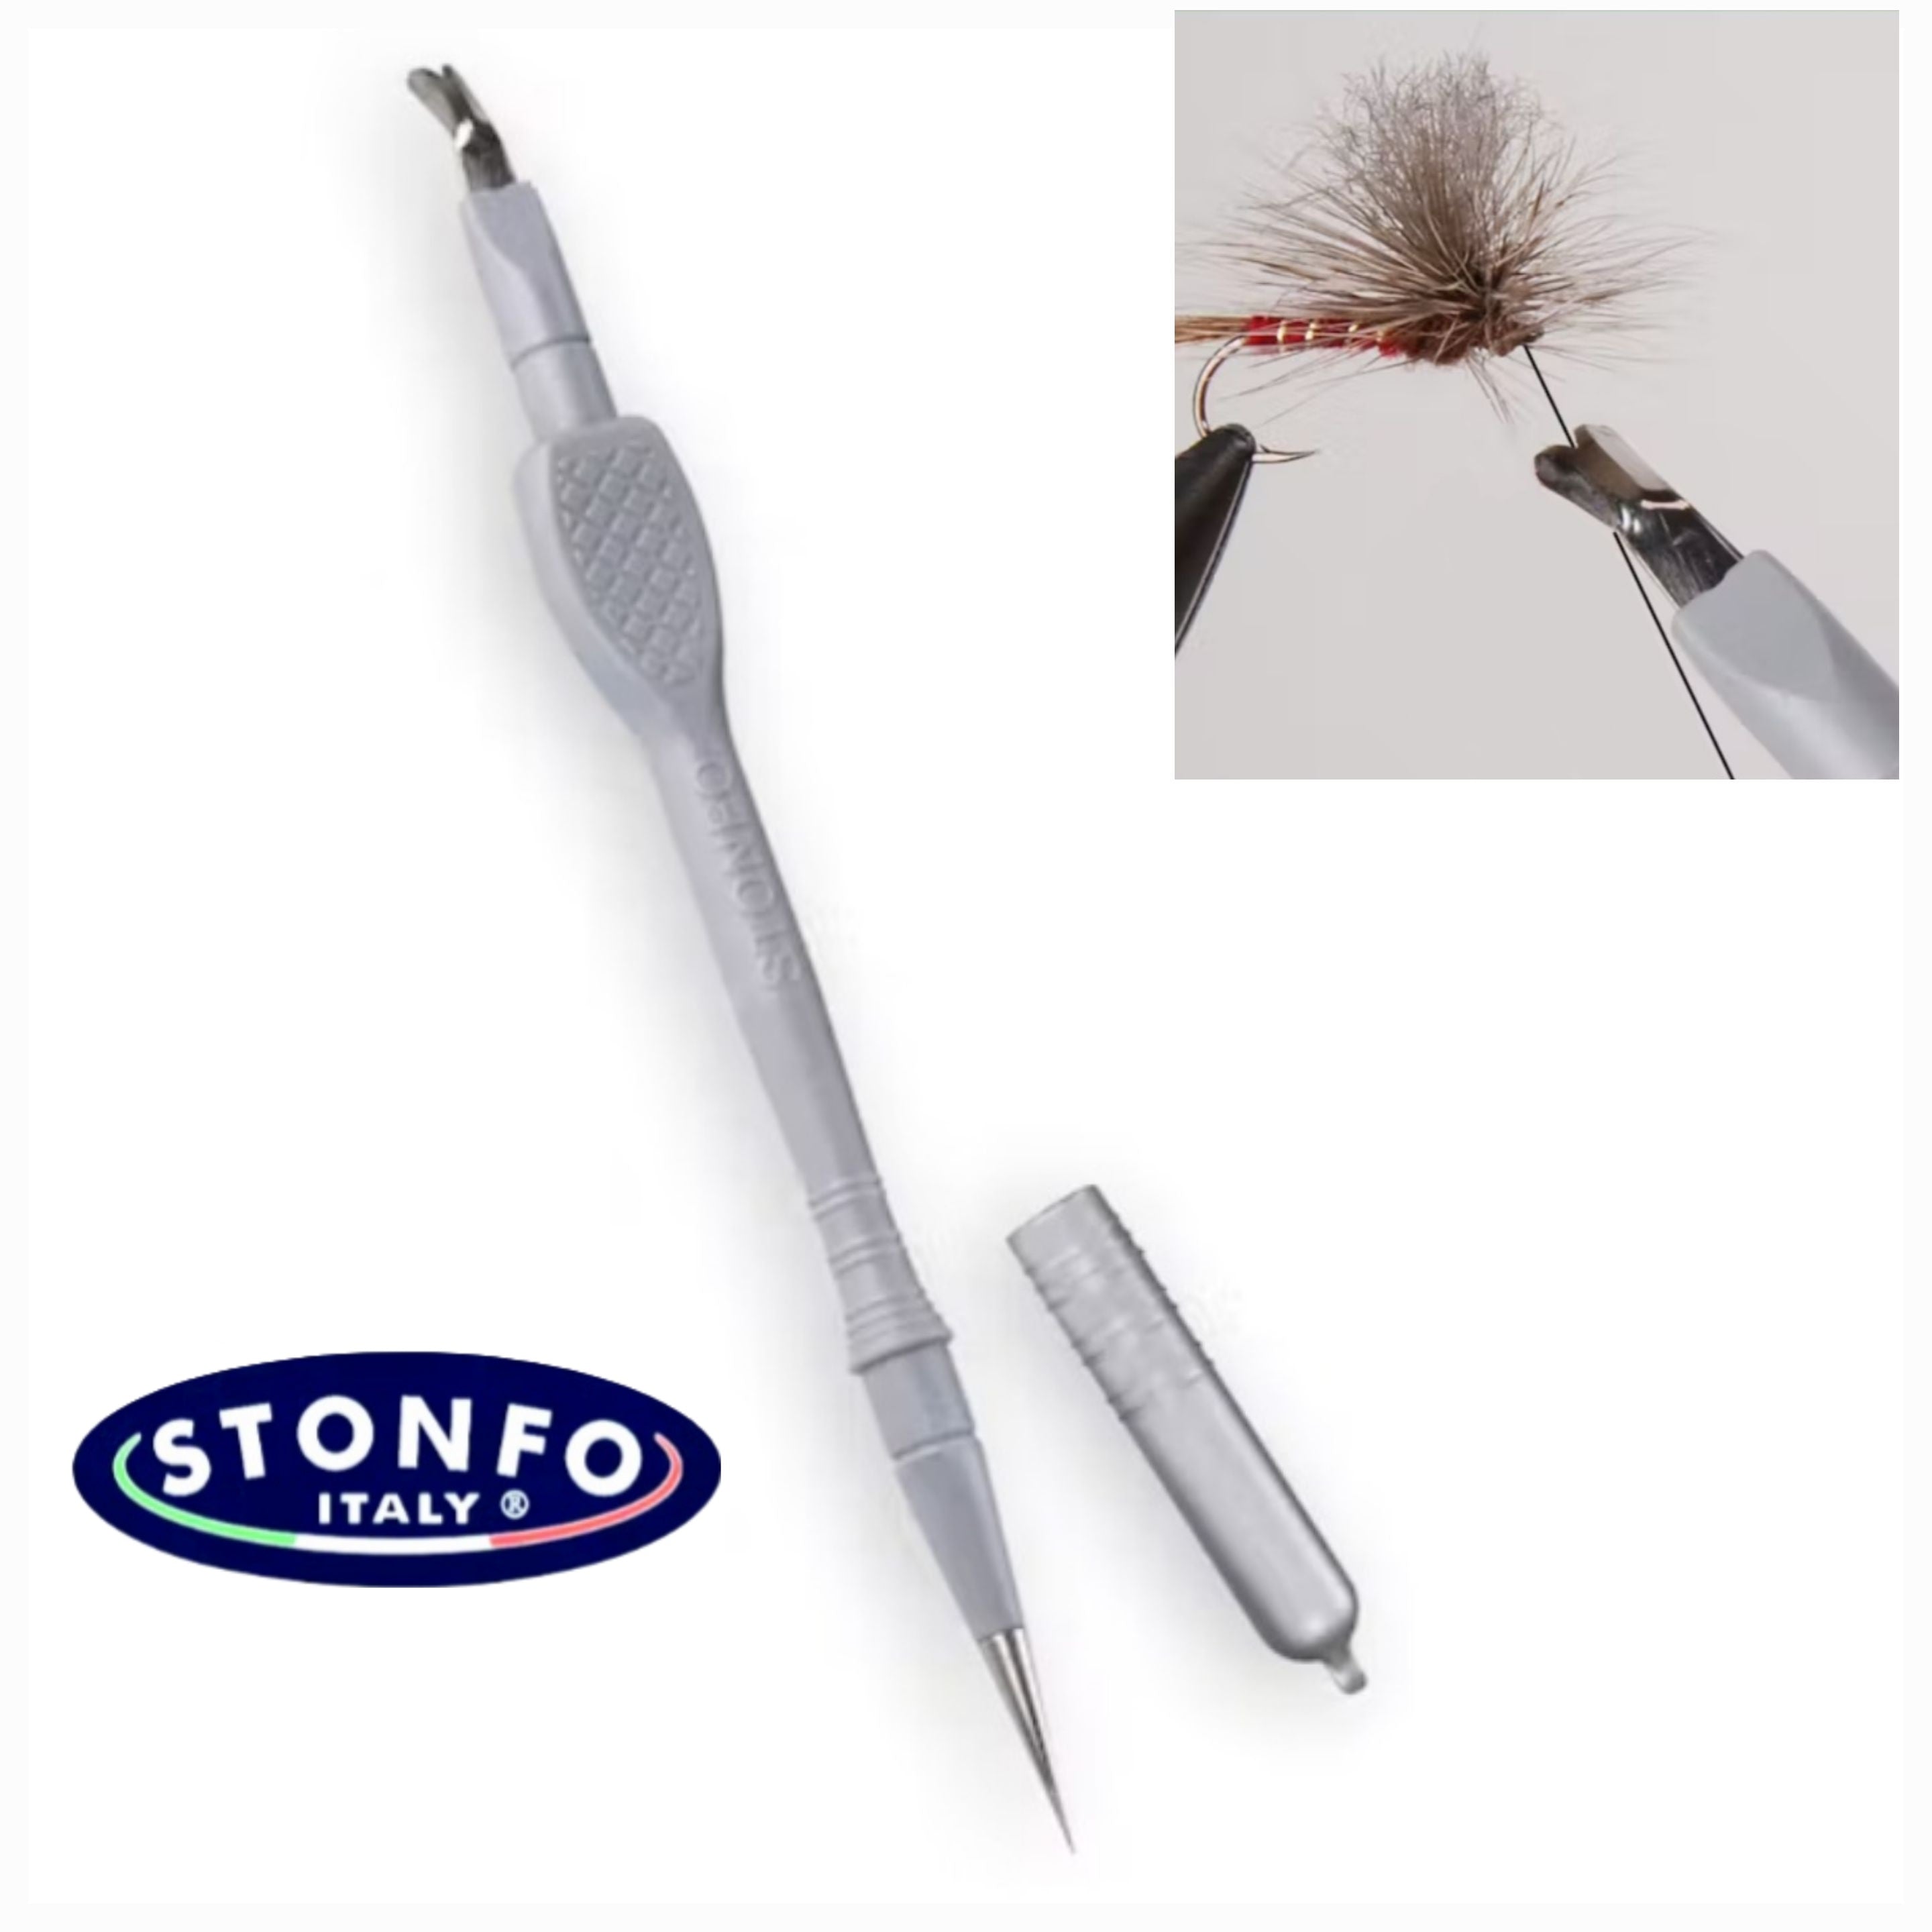 Stonfo Thread Cutter with Precision Bodkin – Fly Artist